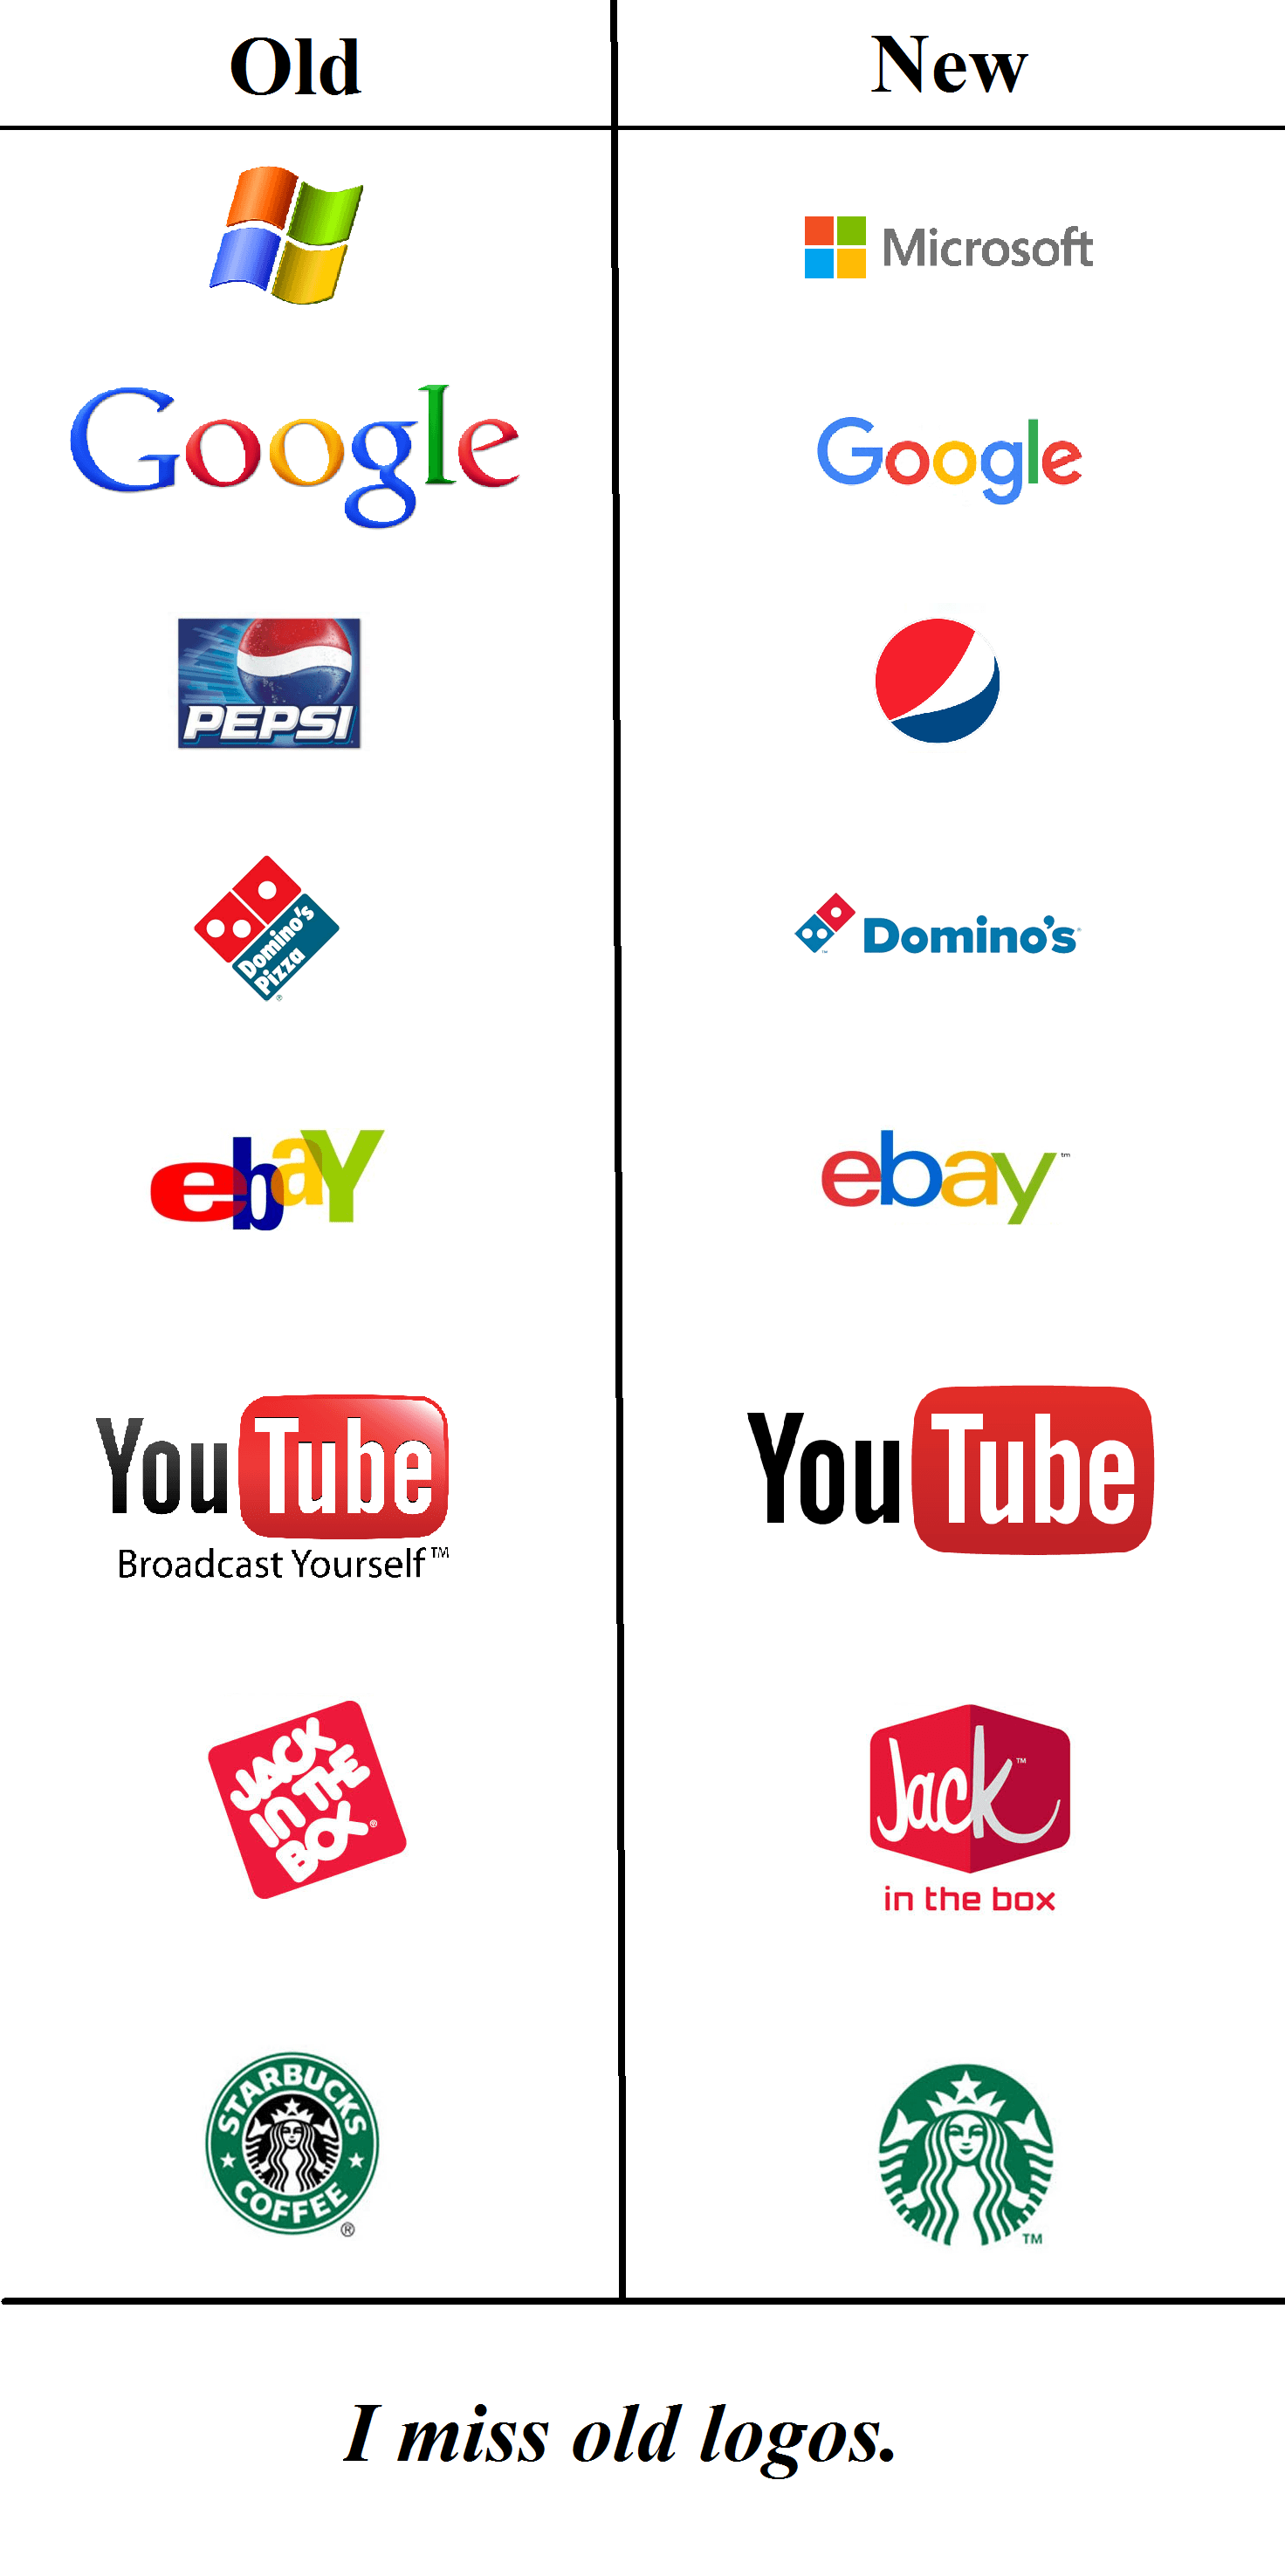 eBay Old Logo - The old logos were pretty cool